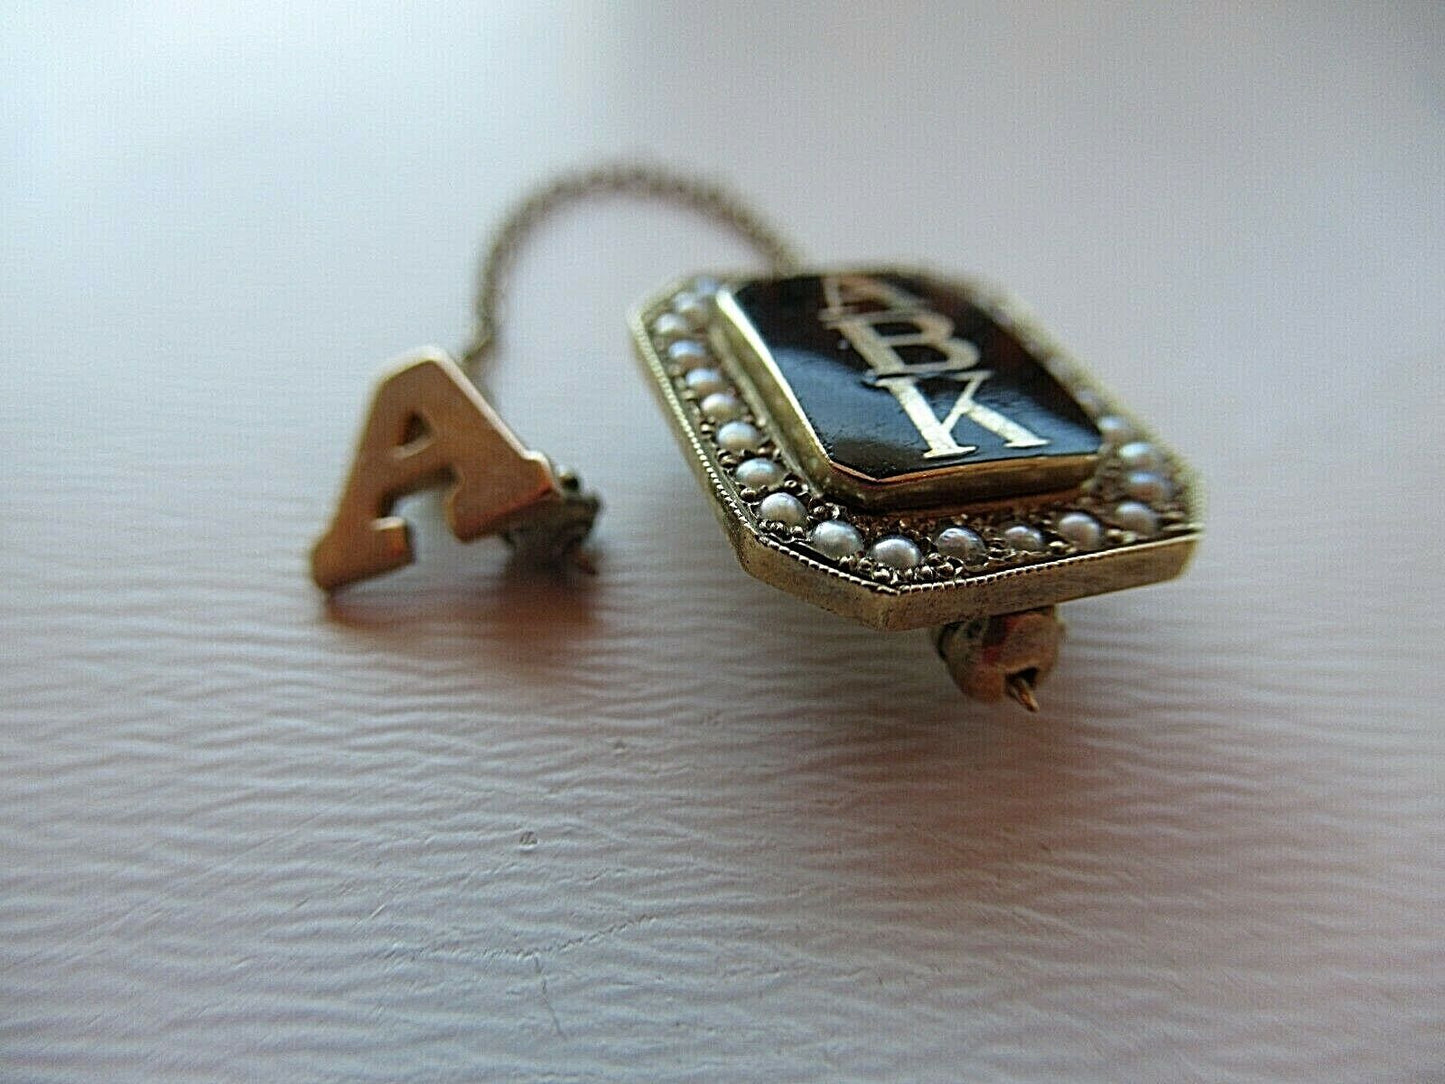 USA FRATERNITY PIN ALPHA BETA KAPPA. MADE IN GOLD. NAMED. MARKED. 1233